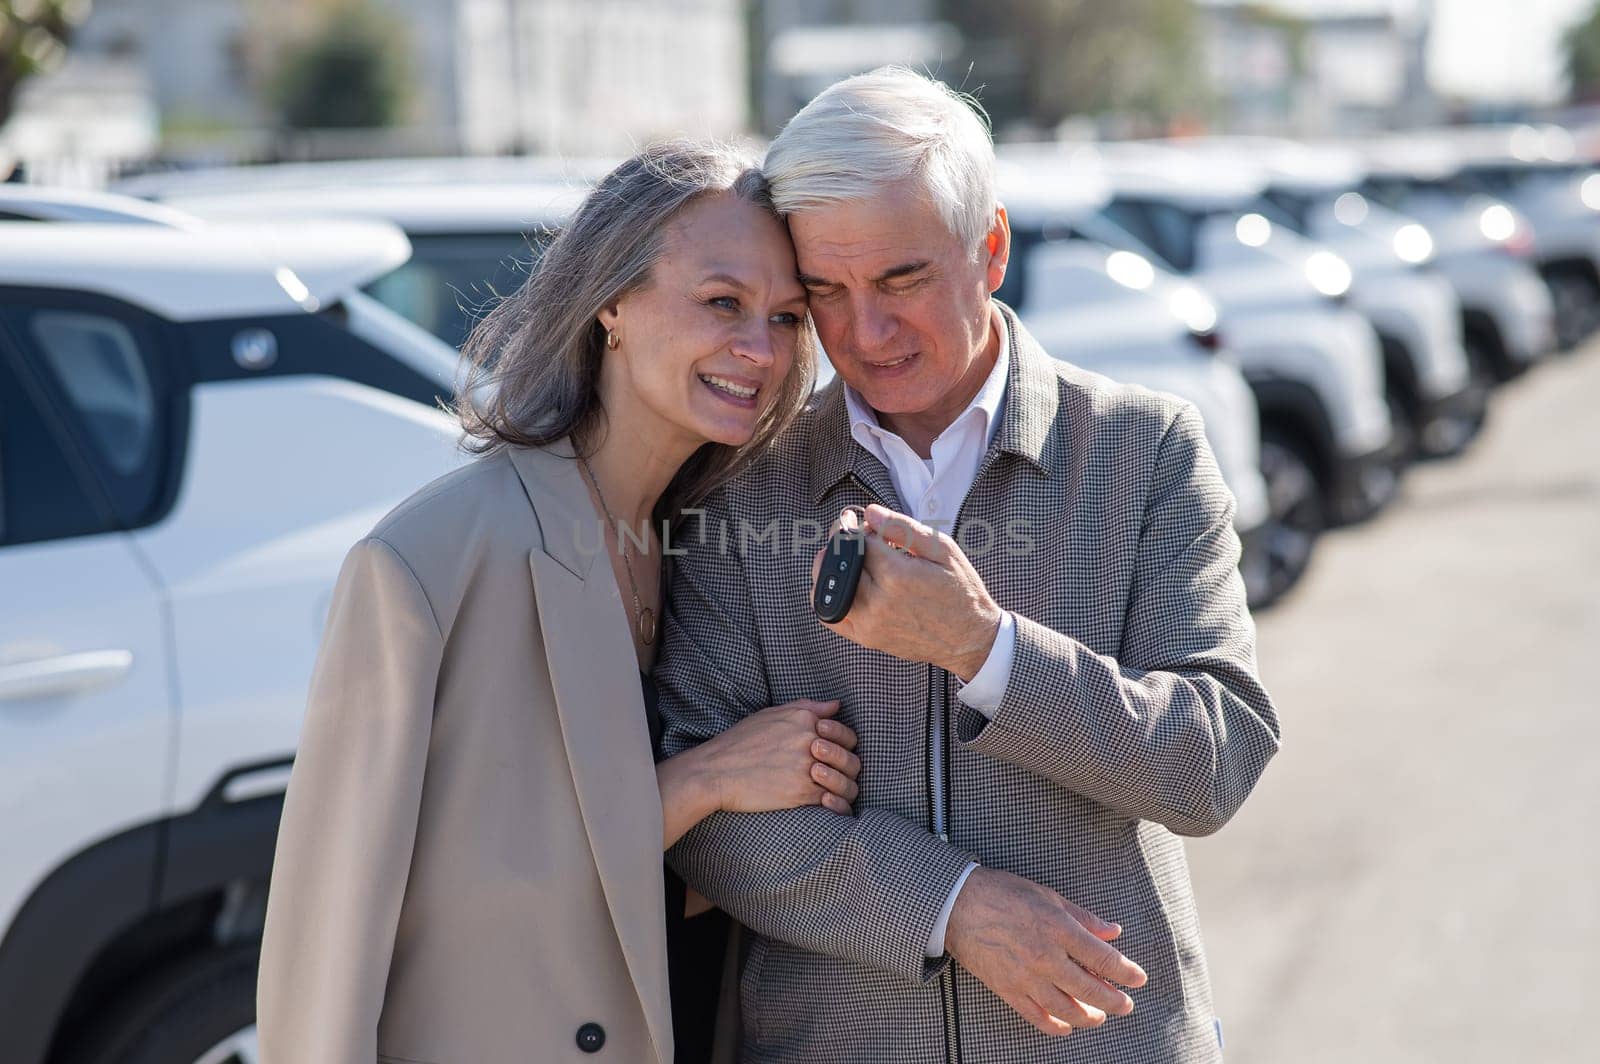 Mature Caucasian couple standing by a car outdoors. Elderly man holding car keys